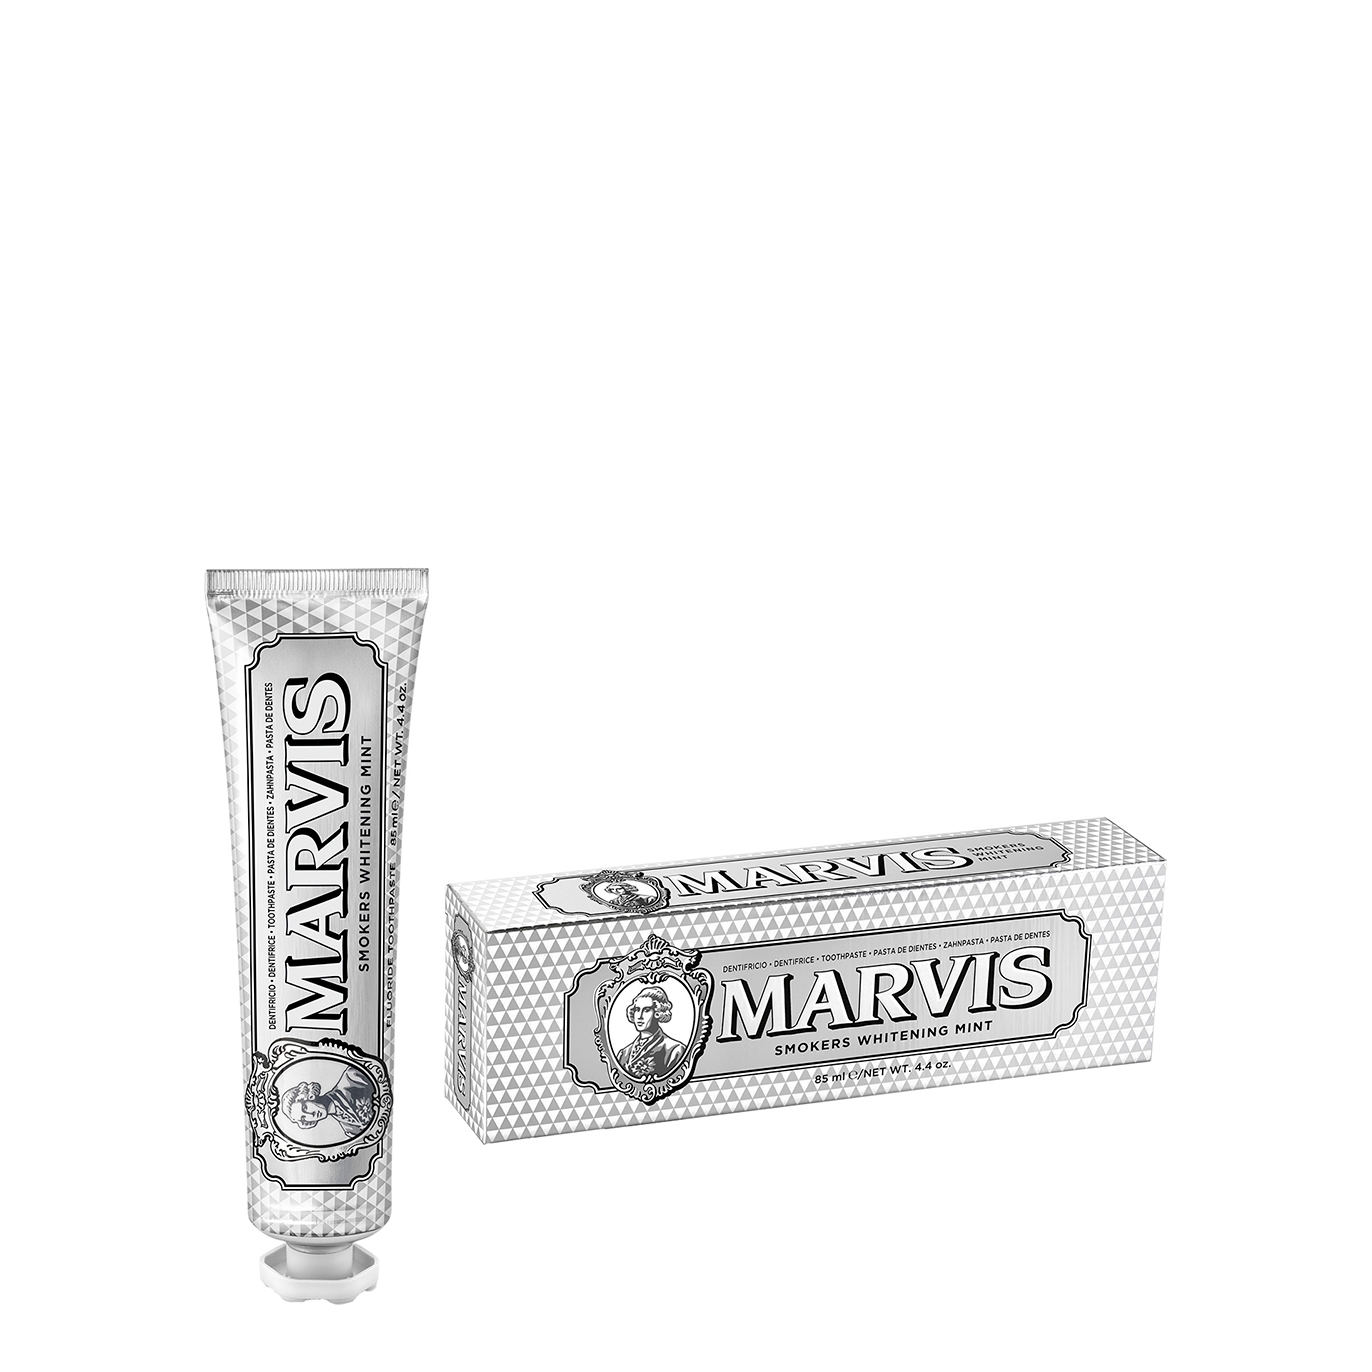 Marvis Whitening Mint Toothpaste For Smokers 85ml